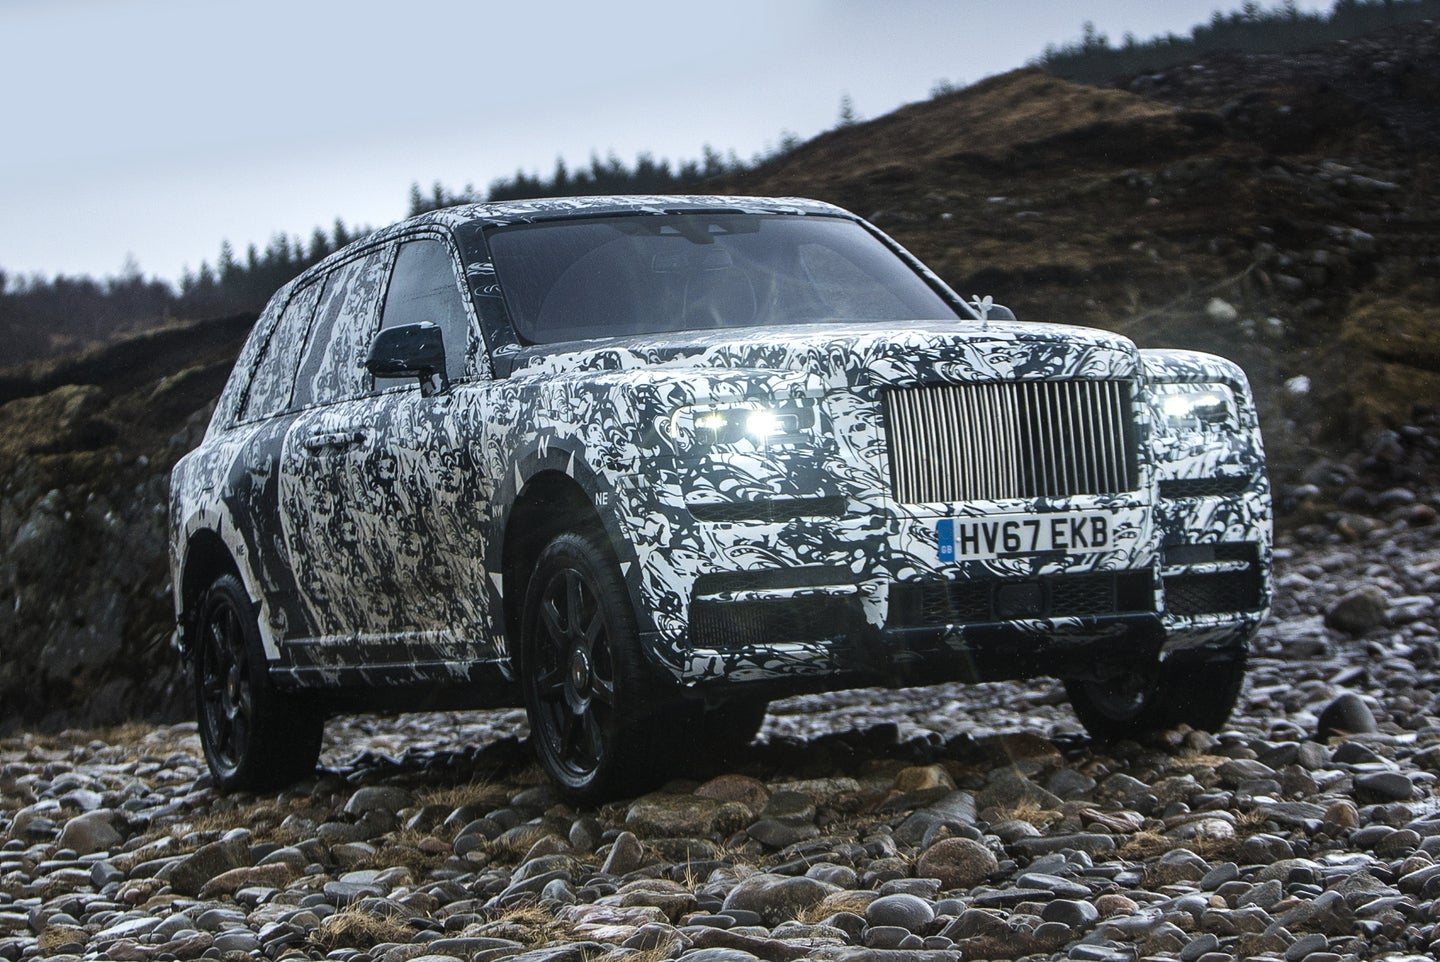 Rolls-Royce Cullinan SUV to Take on ‘The Final Challenge’